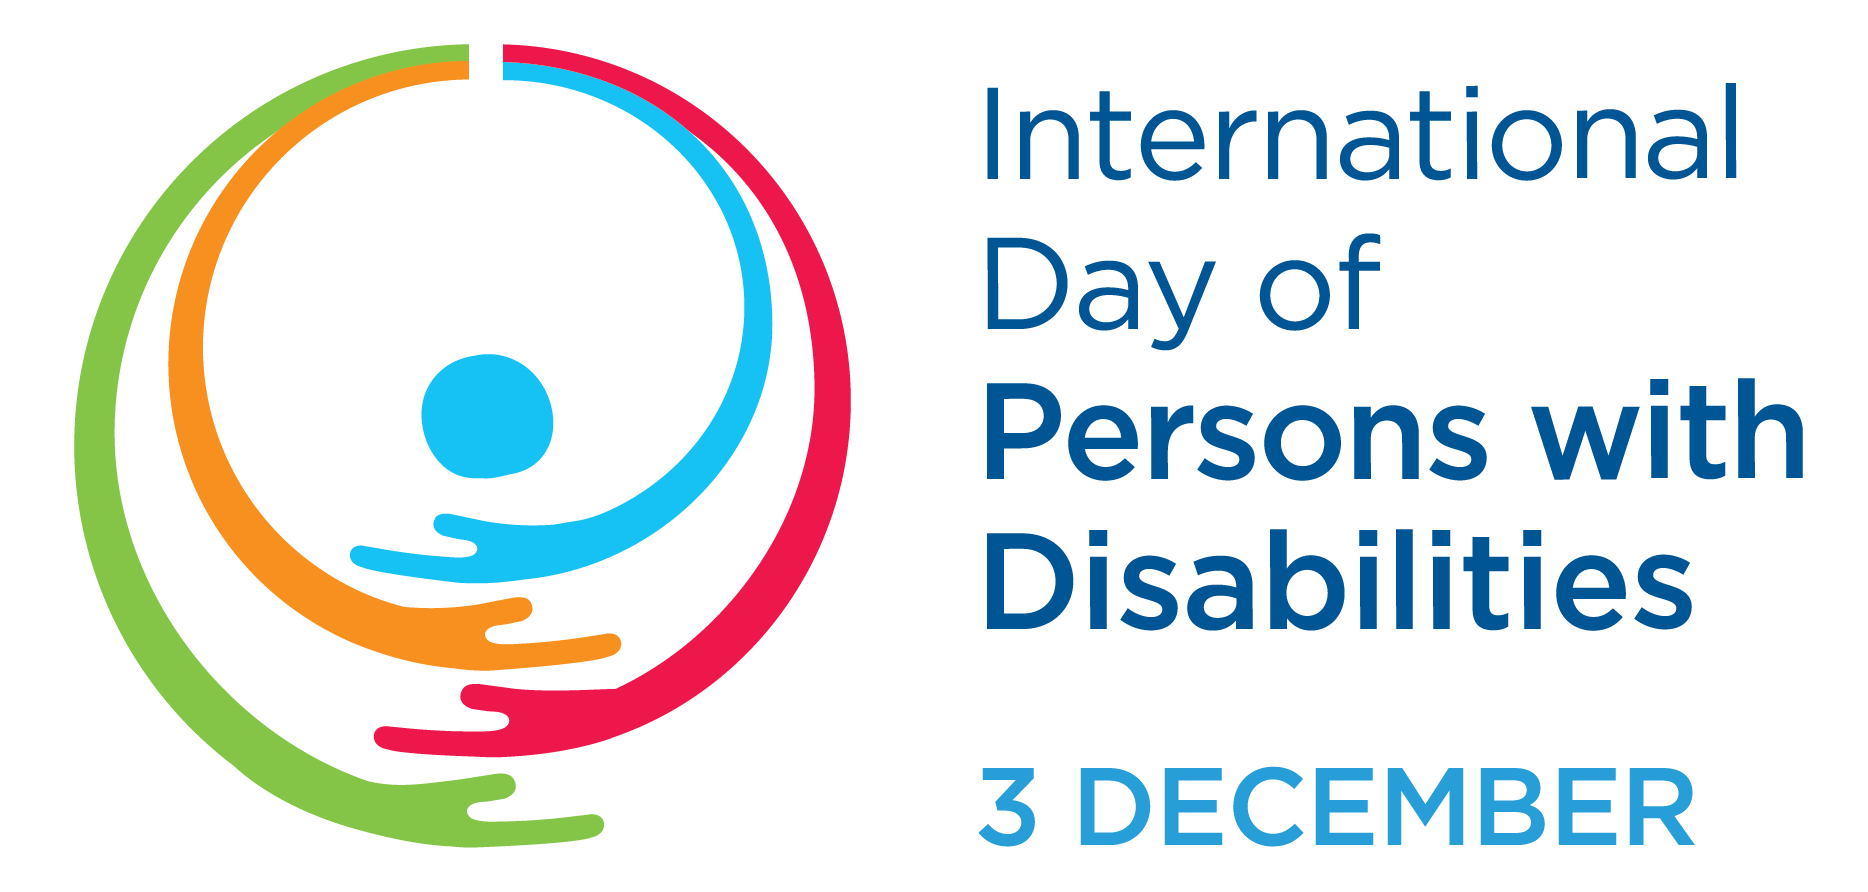 International Day of Persons with Disabilities Official Logo